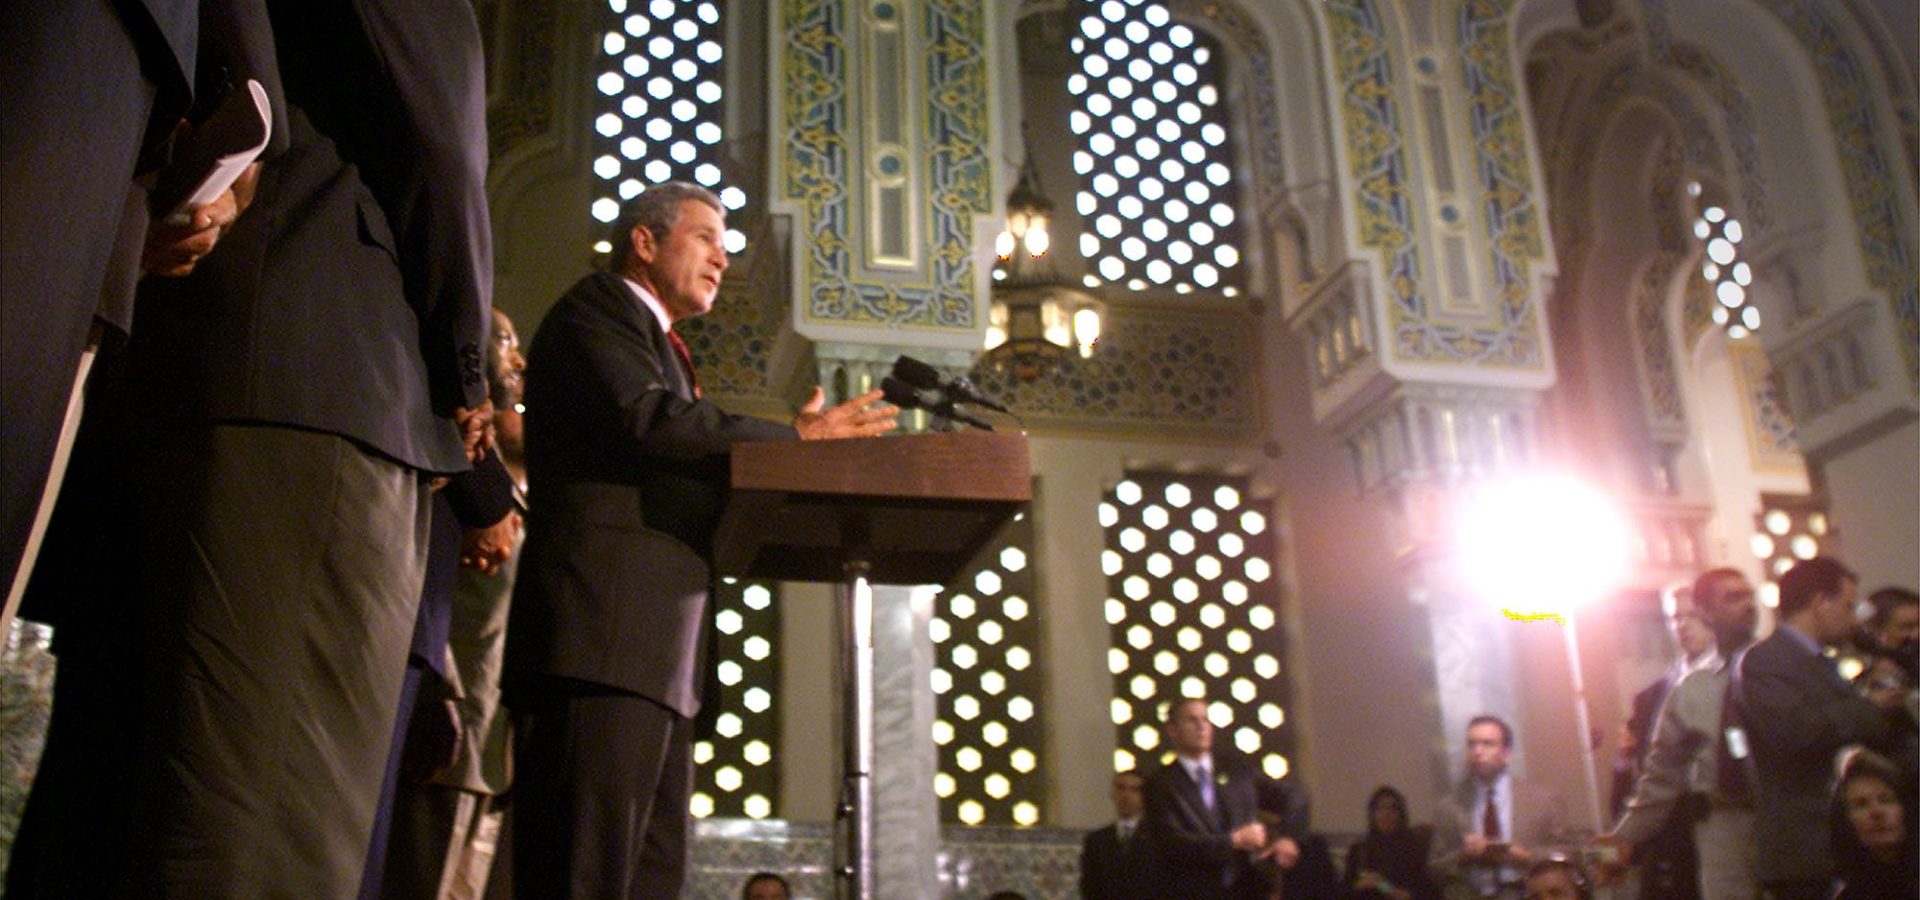 President Bush speaks to the press during his visit to the Mosque at the Islamic Center in Washington, D.C., on Monday, September 17, 2001. (Photo: Chuck Kennedy)